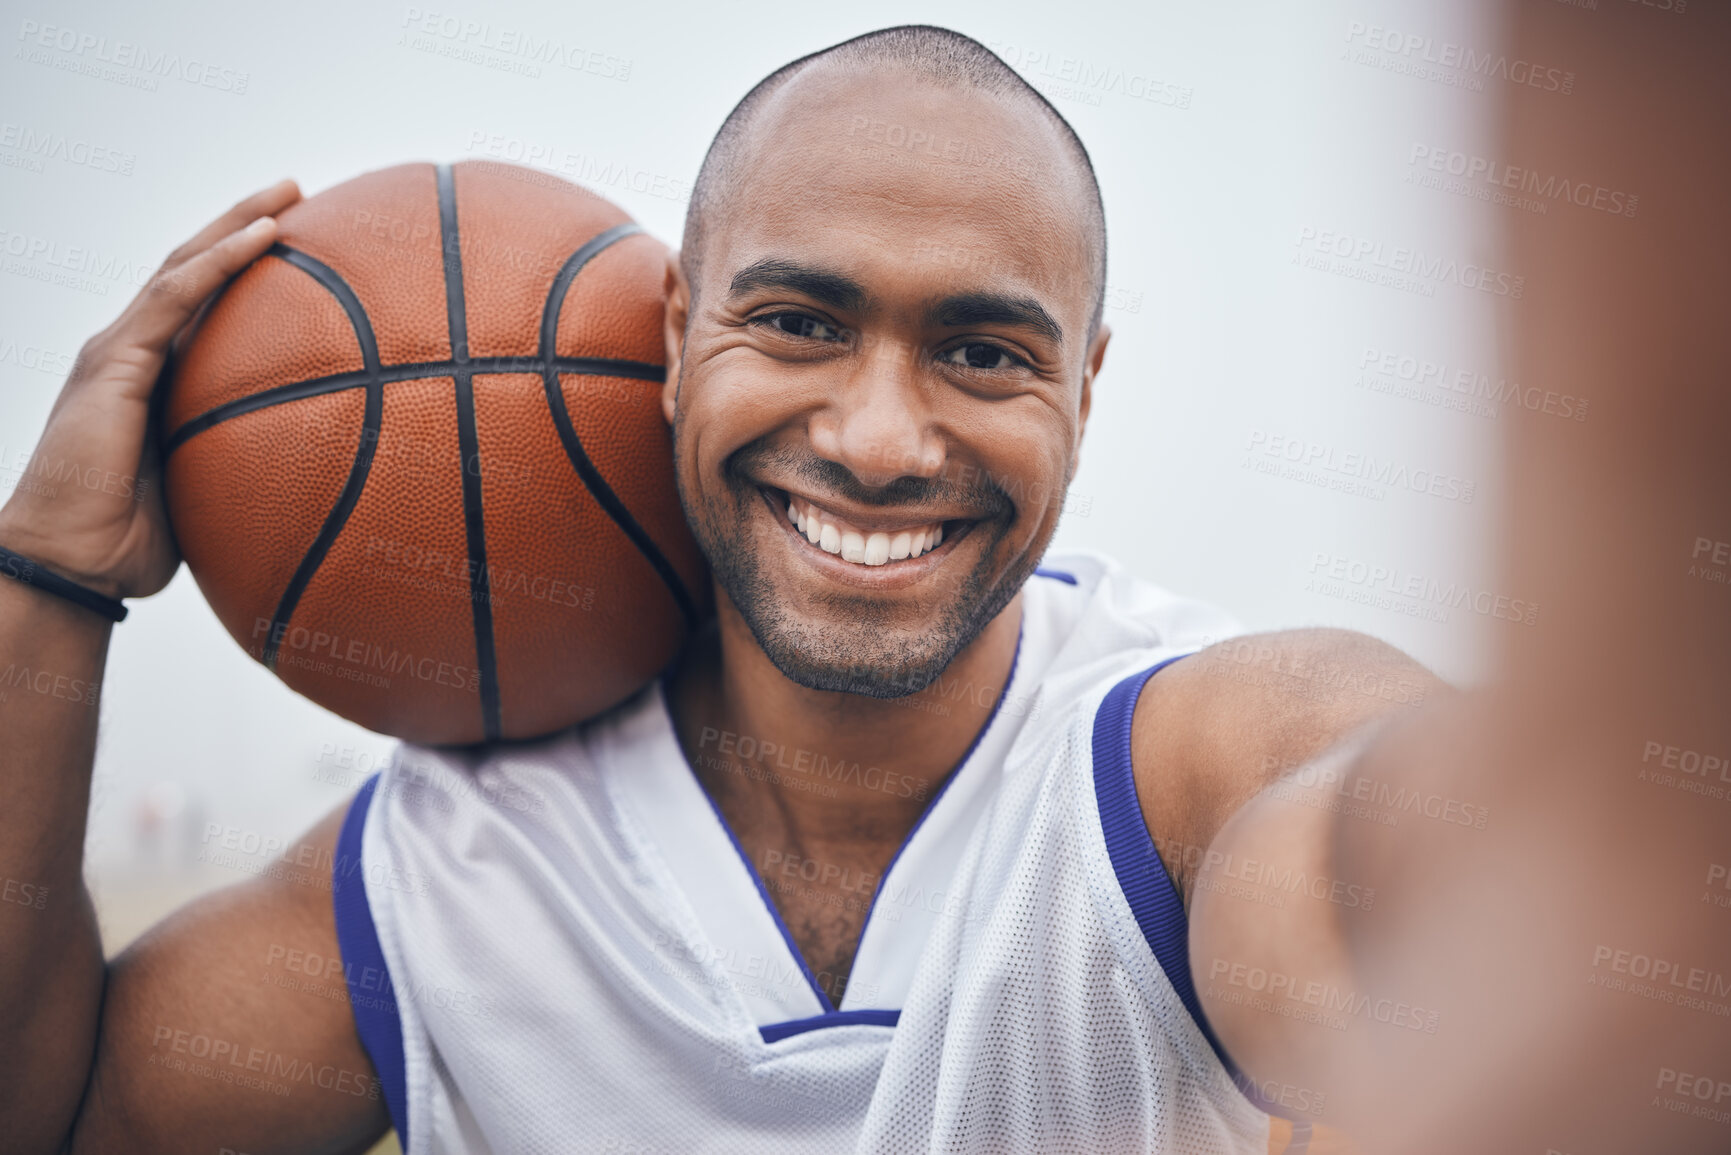 Buy stock photo Shot of a young male basketball player taking a selfie while holding the ball